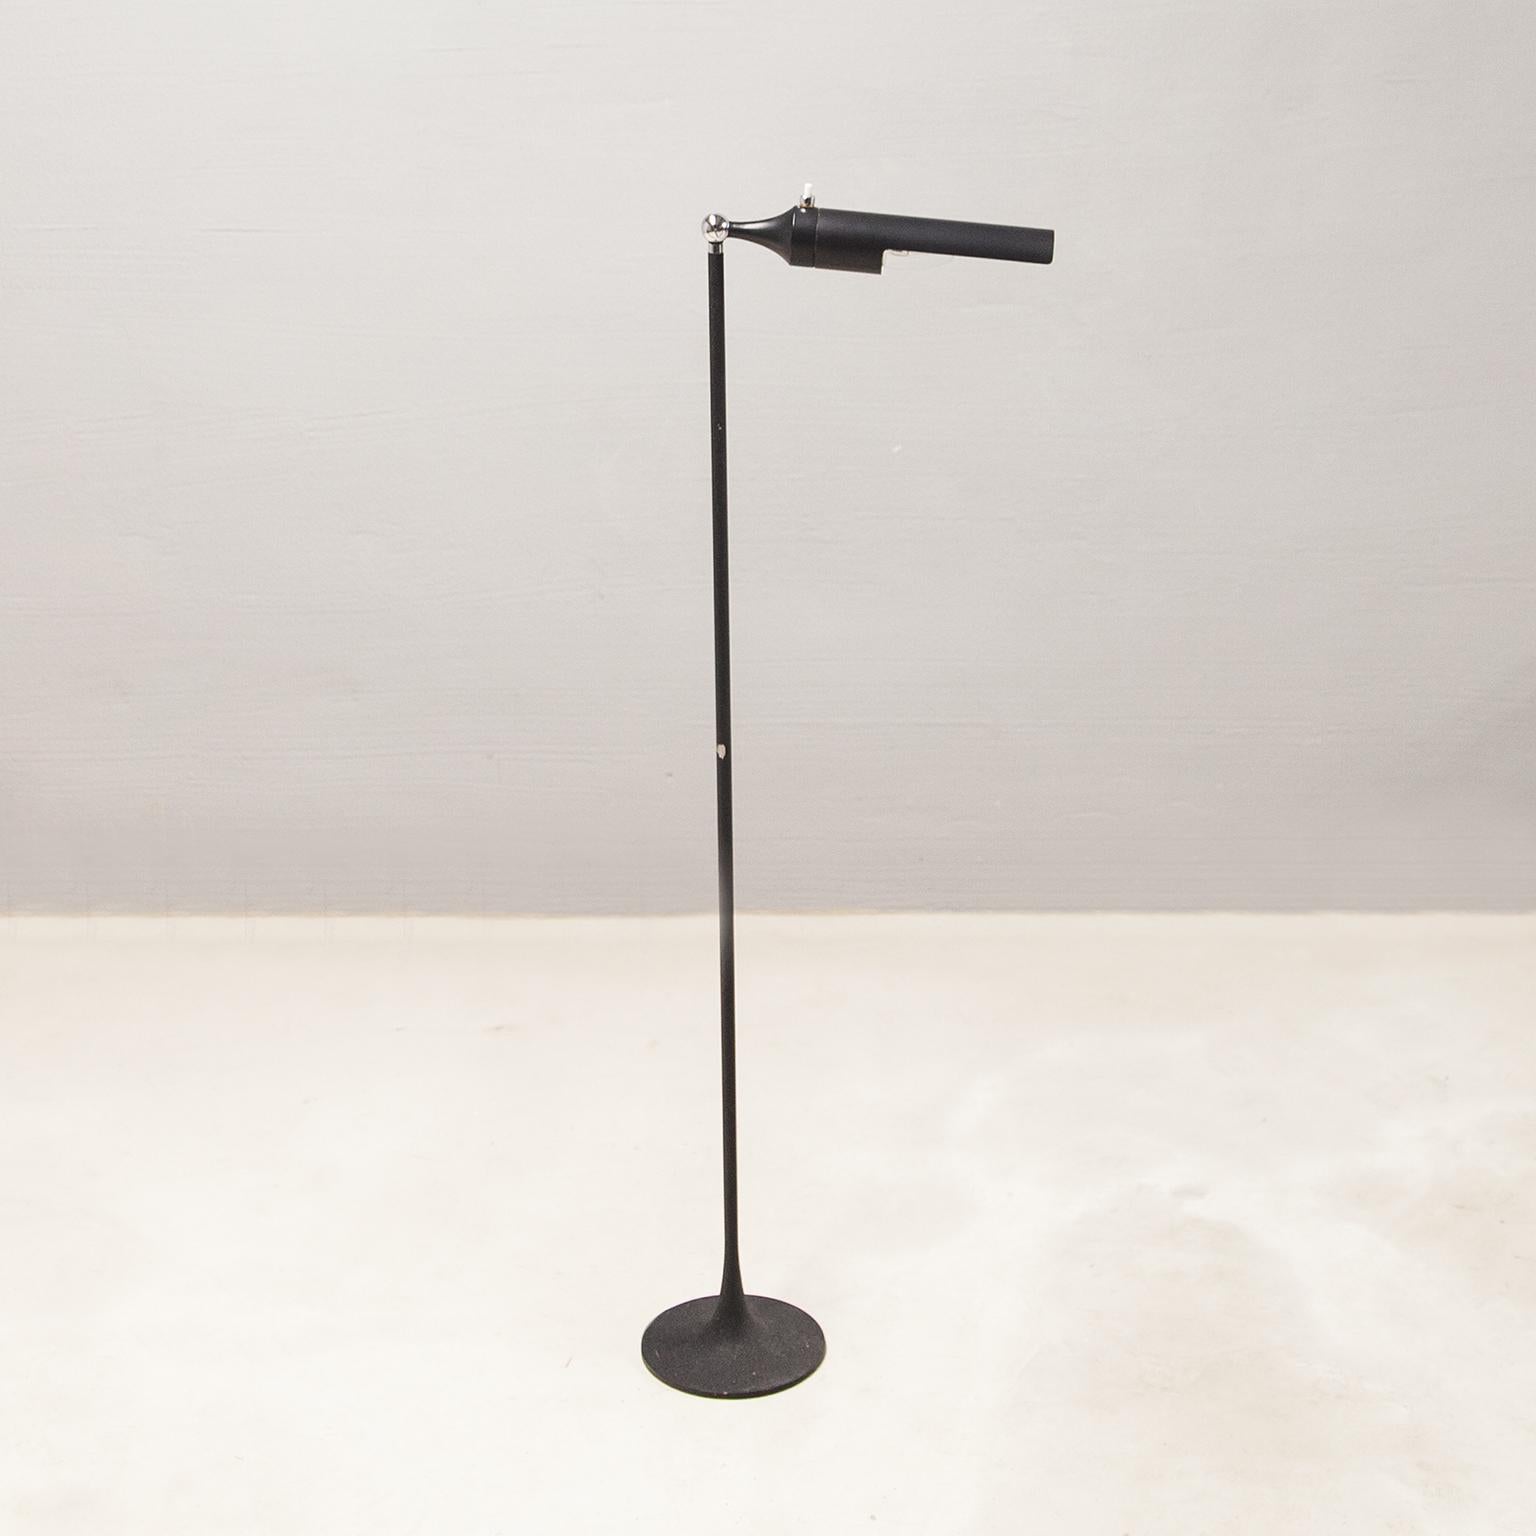 Gino Sarfatti floor lamp Model 1086 for Arteluce, Italy 1961. Variably adjustable tube construction in black enamelled steel and aluminium., swivelling joint for both horizontal and vertical adjustment, with Arteluce label in the shade. Very good